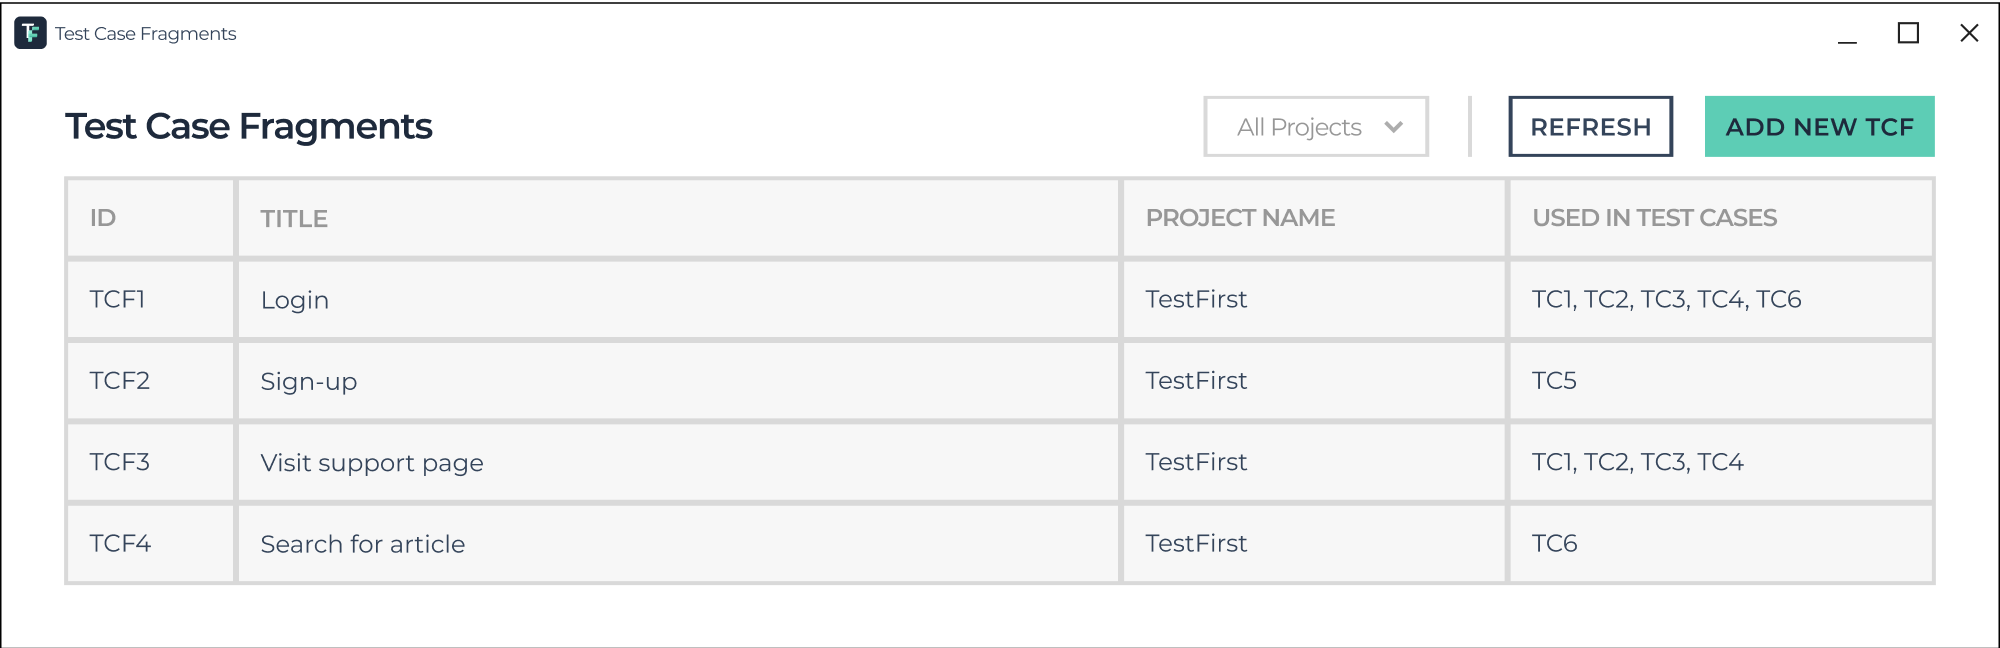 Maintain test cases 10x faster with the Test Case Fragments